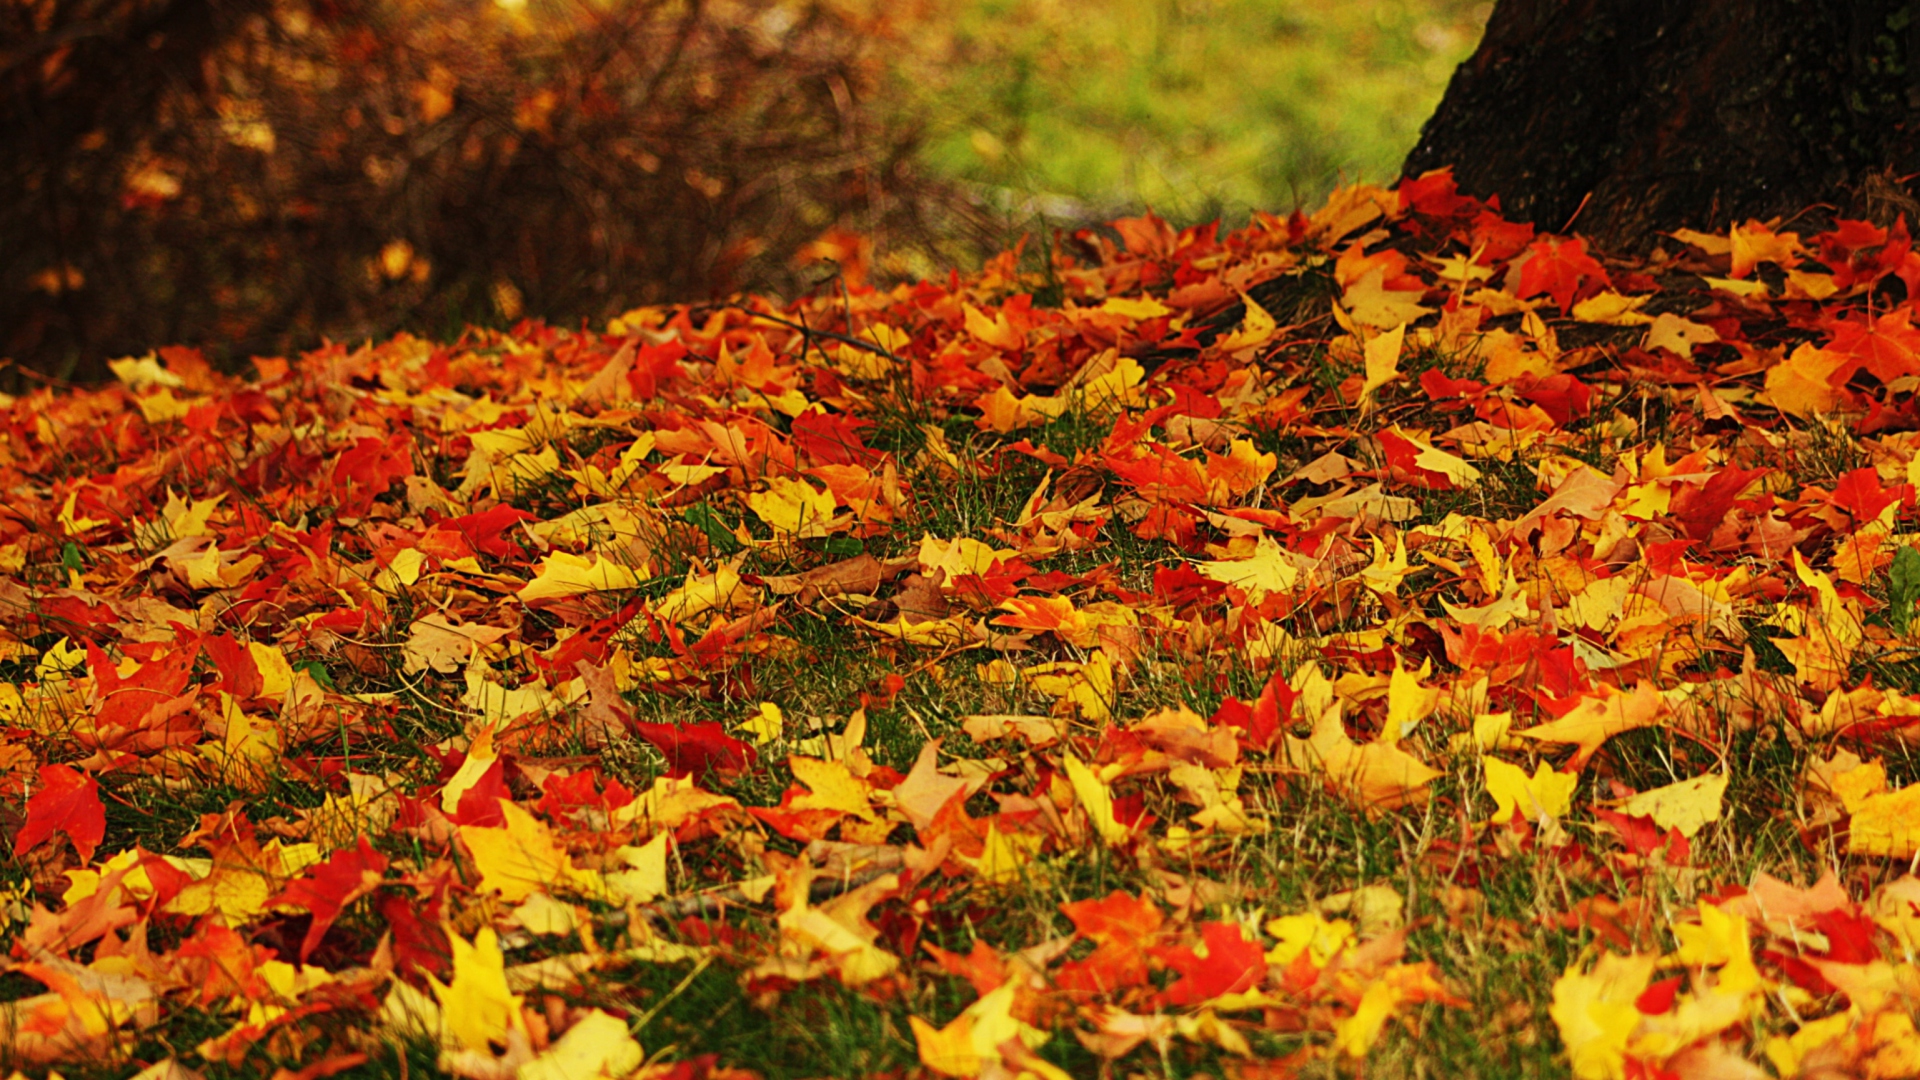 Das Red And Yellow Autumn Leaves Wallpaper 1920x1080